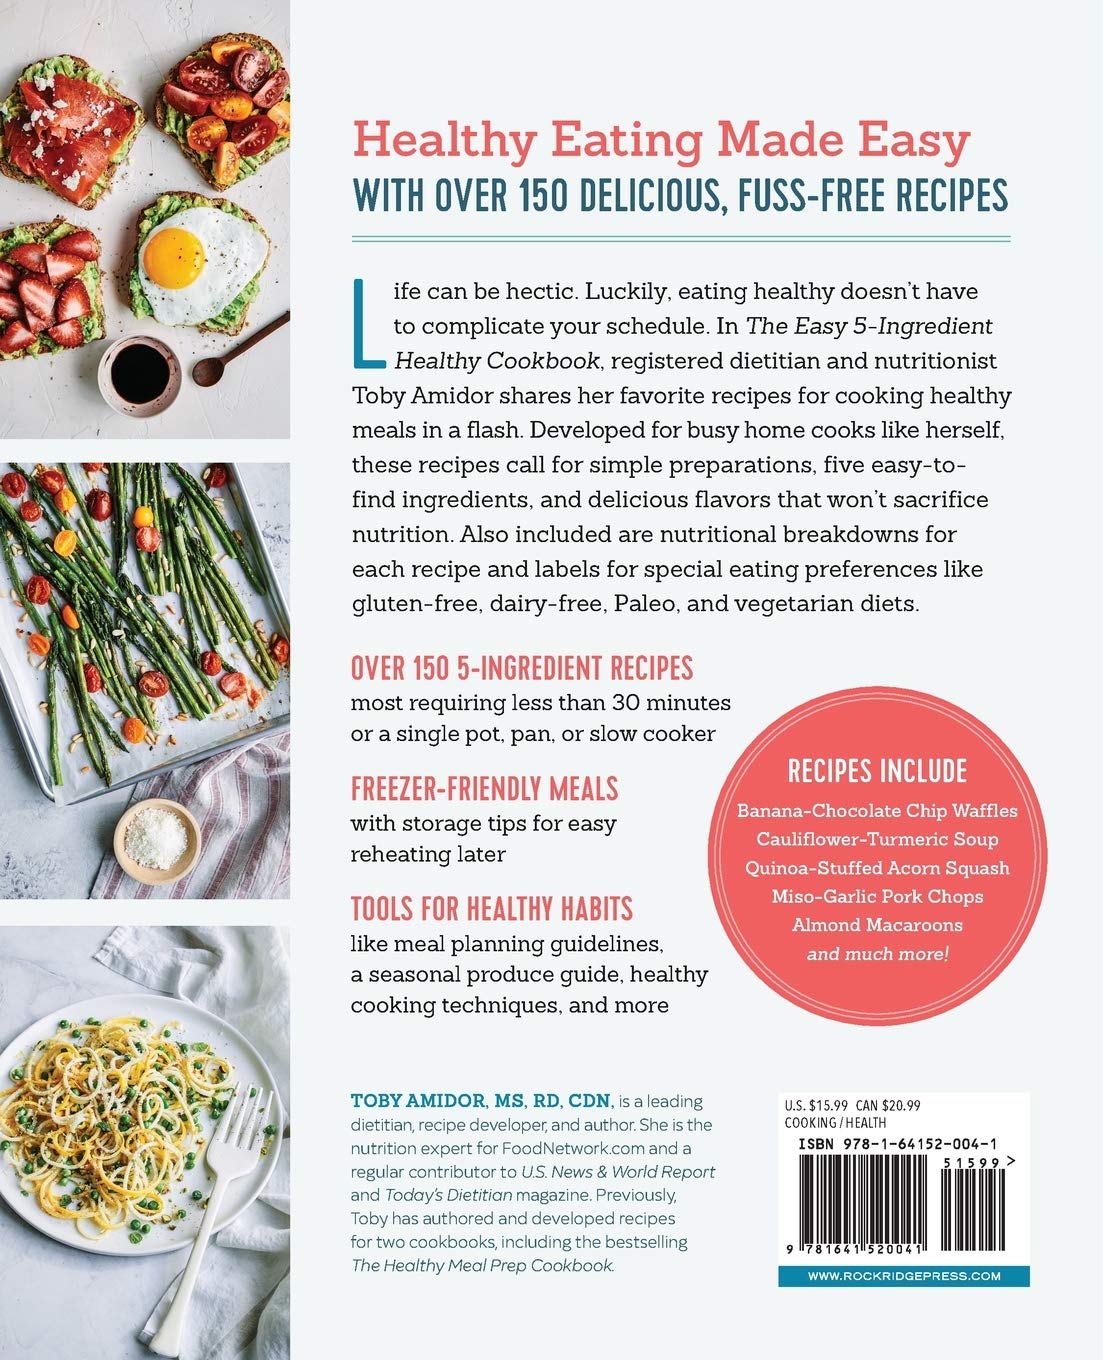 The Easy 5-Ingredient Healthy Cookbook: Simple Recipes to Make Healthy Eating Delicious (Spiral Bound)